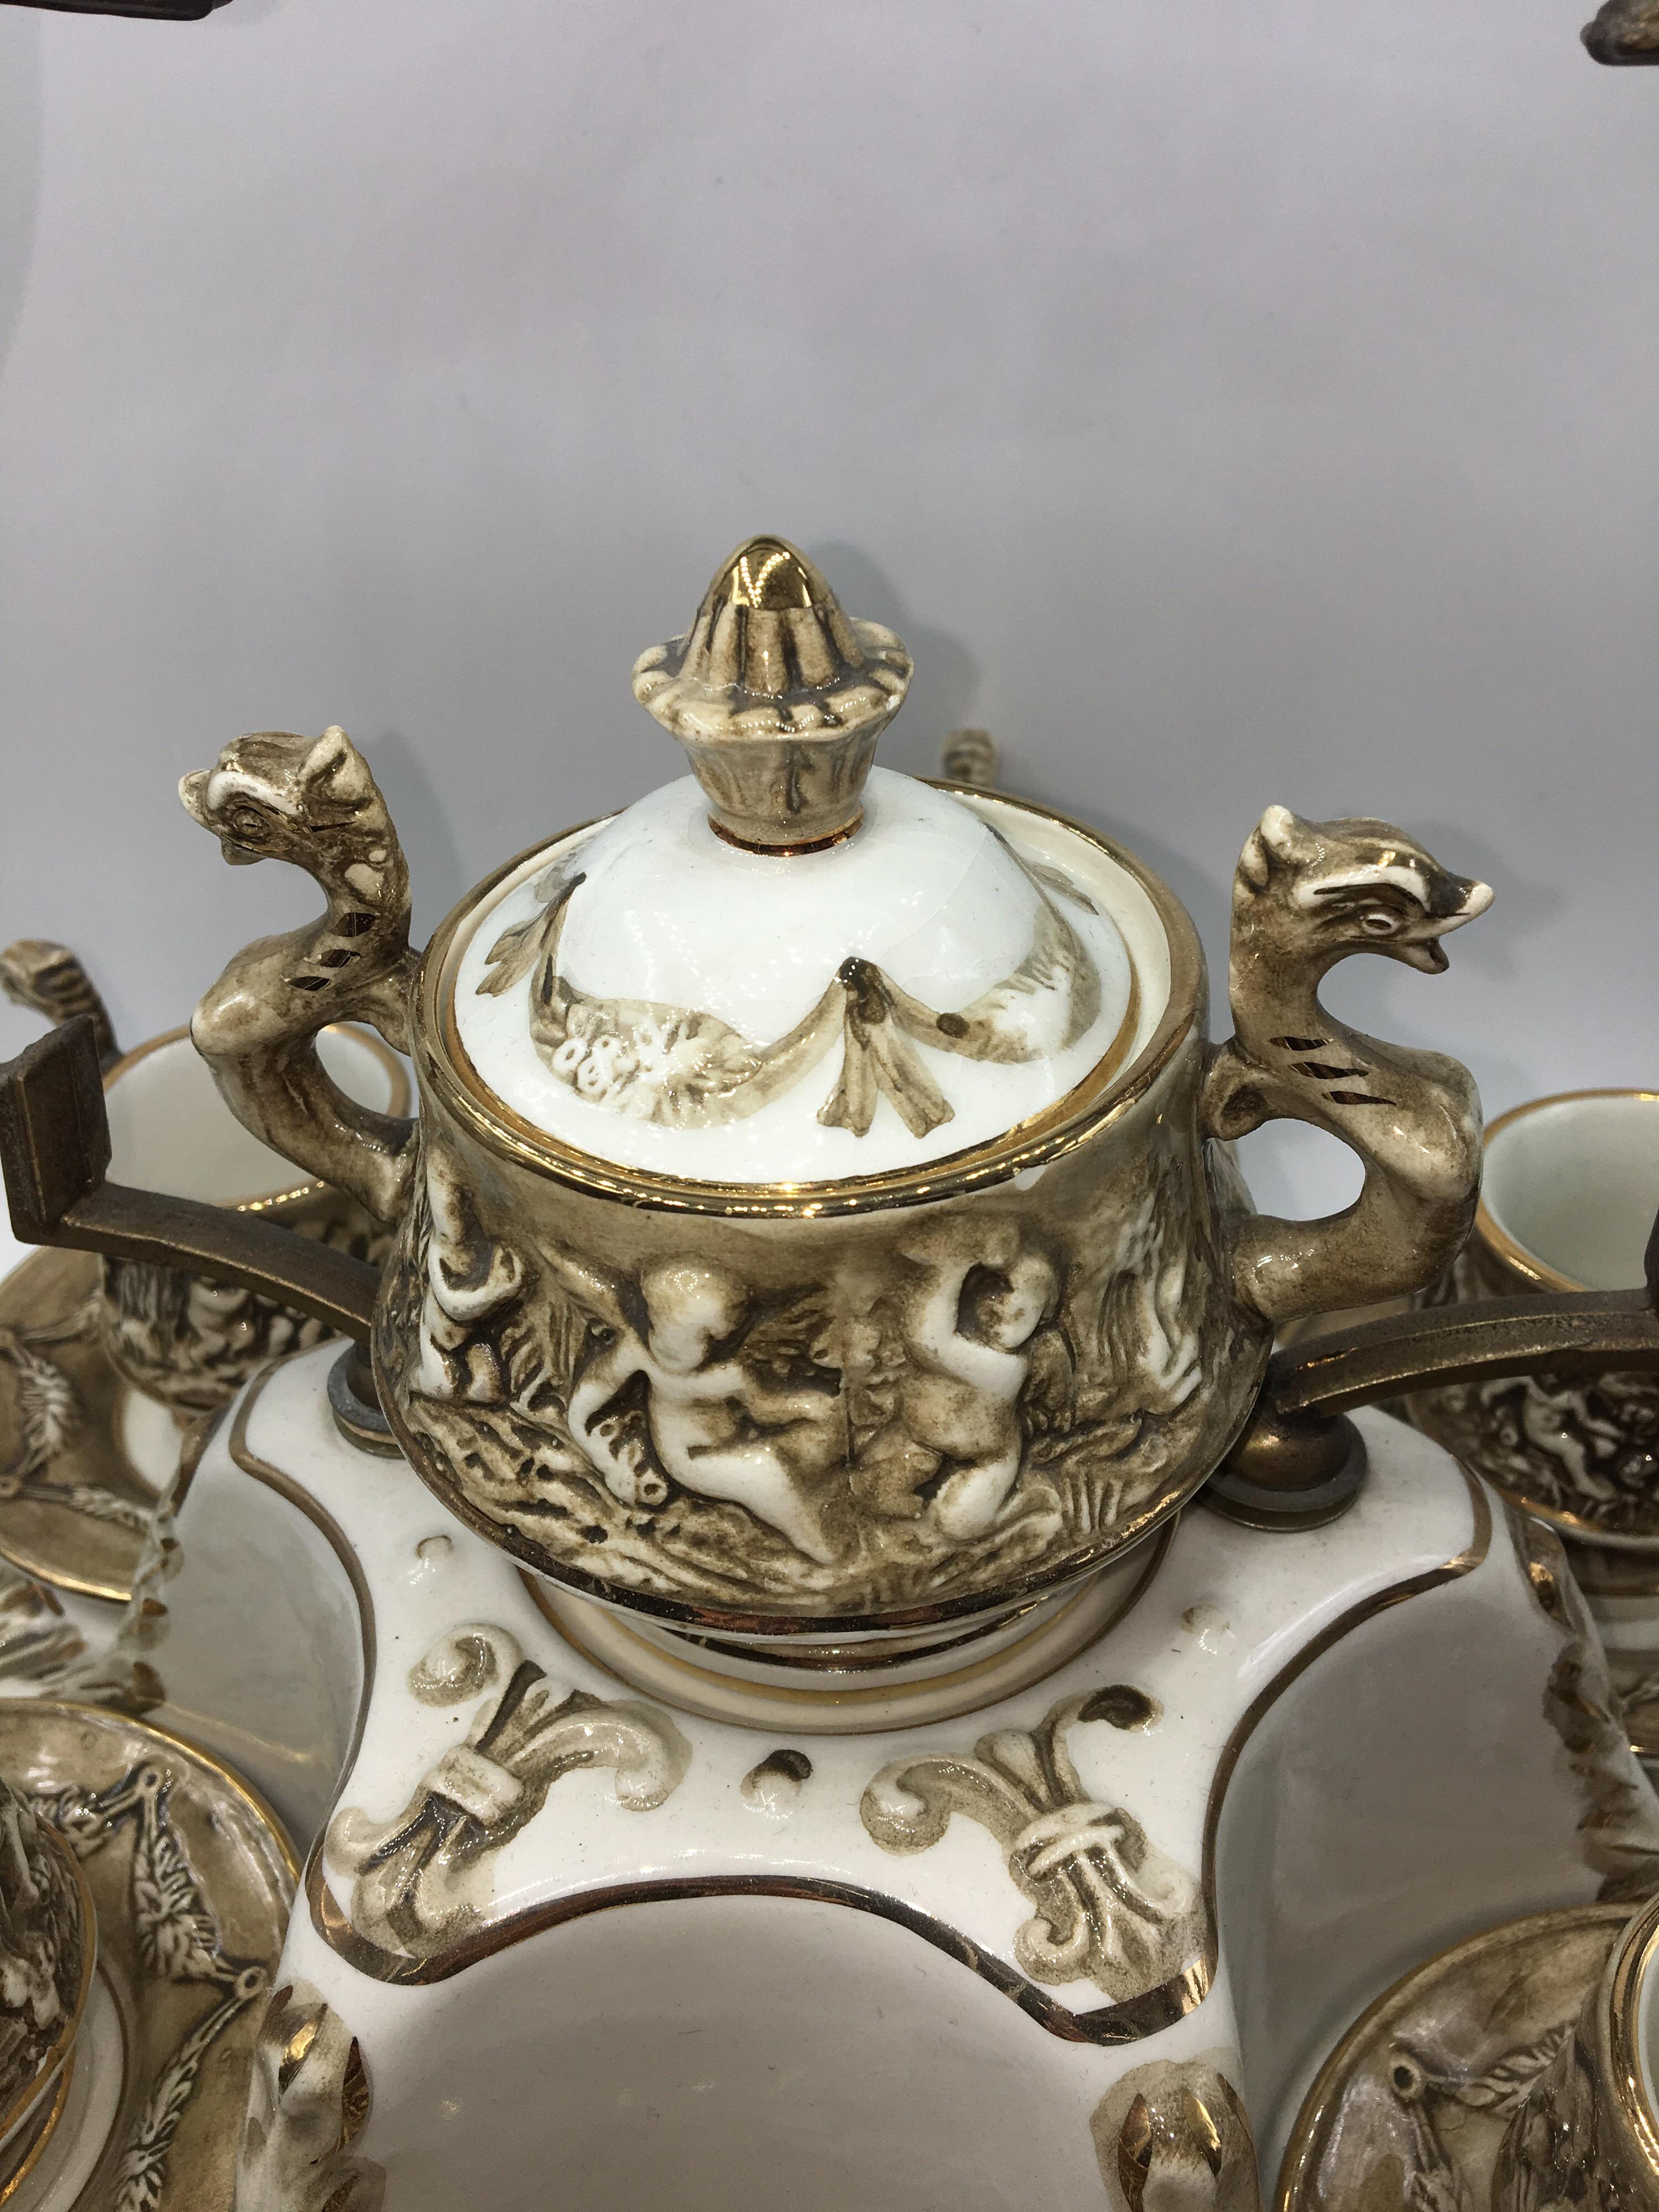 Beautiful vintage coffee service Capodimonte porcelain demitasse, 1950s.
The service consists of 6 cups and sugar bowl, all on a tray with brass handle.
Each piece has the mark of originality.